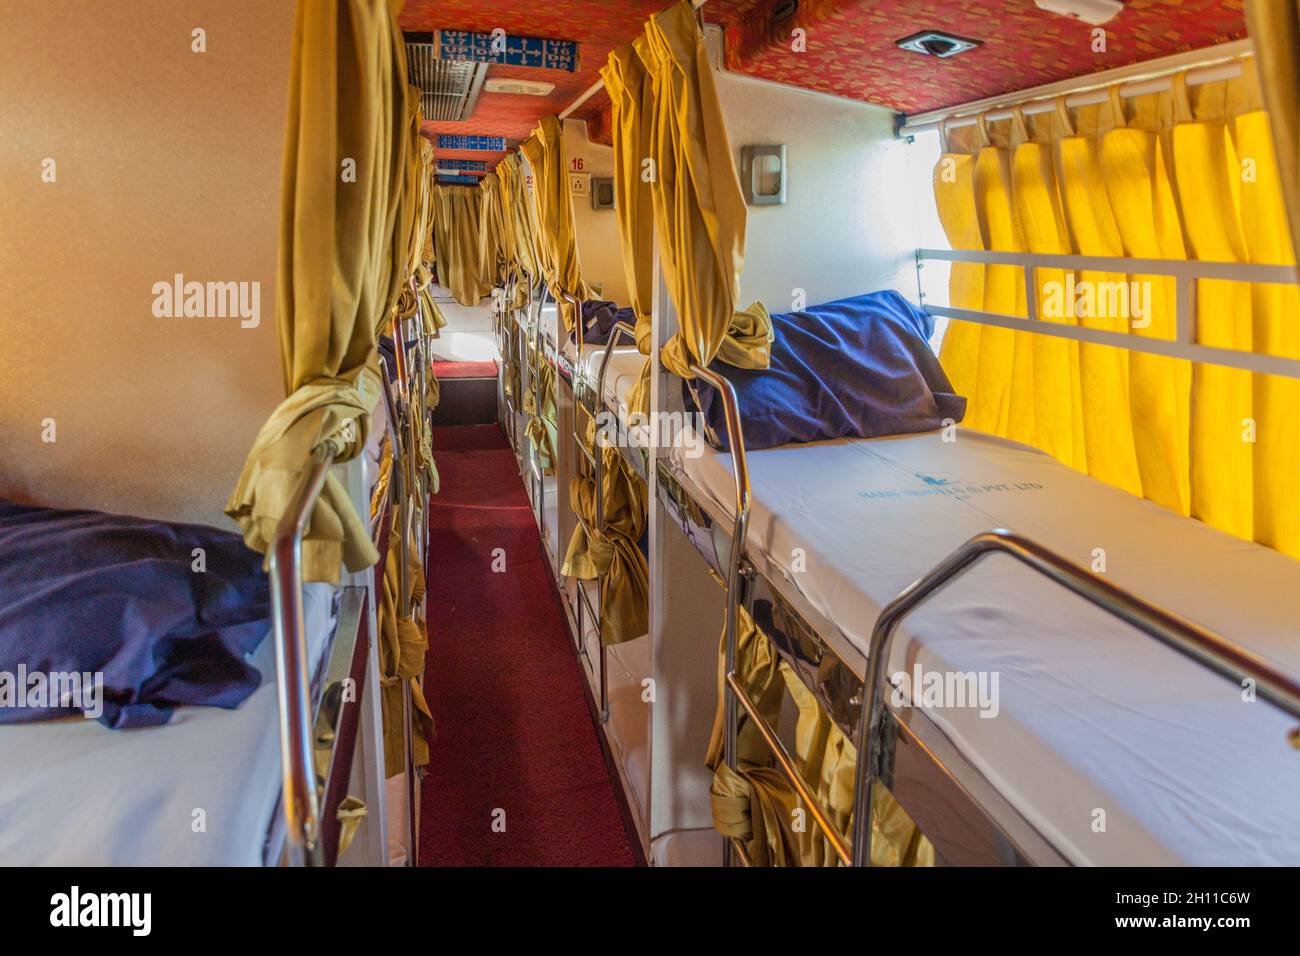 BHOPAL, INDIA - FEBRUARY 5, 2017: Interior of a sleeper bus in India Stock Photo